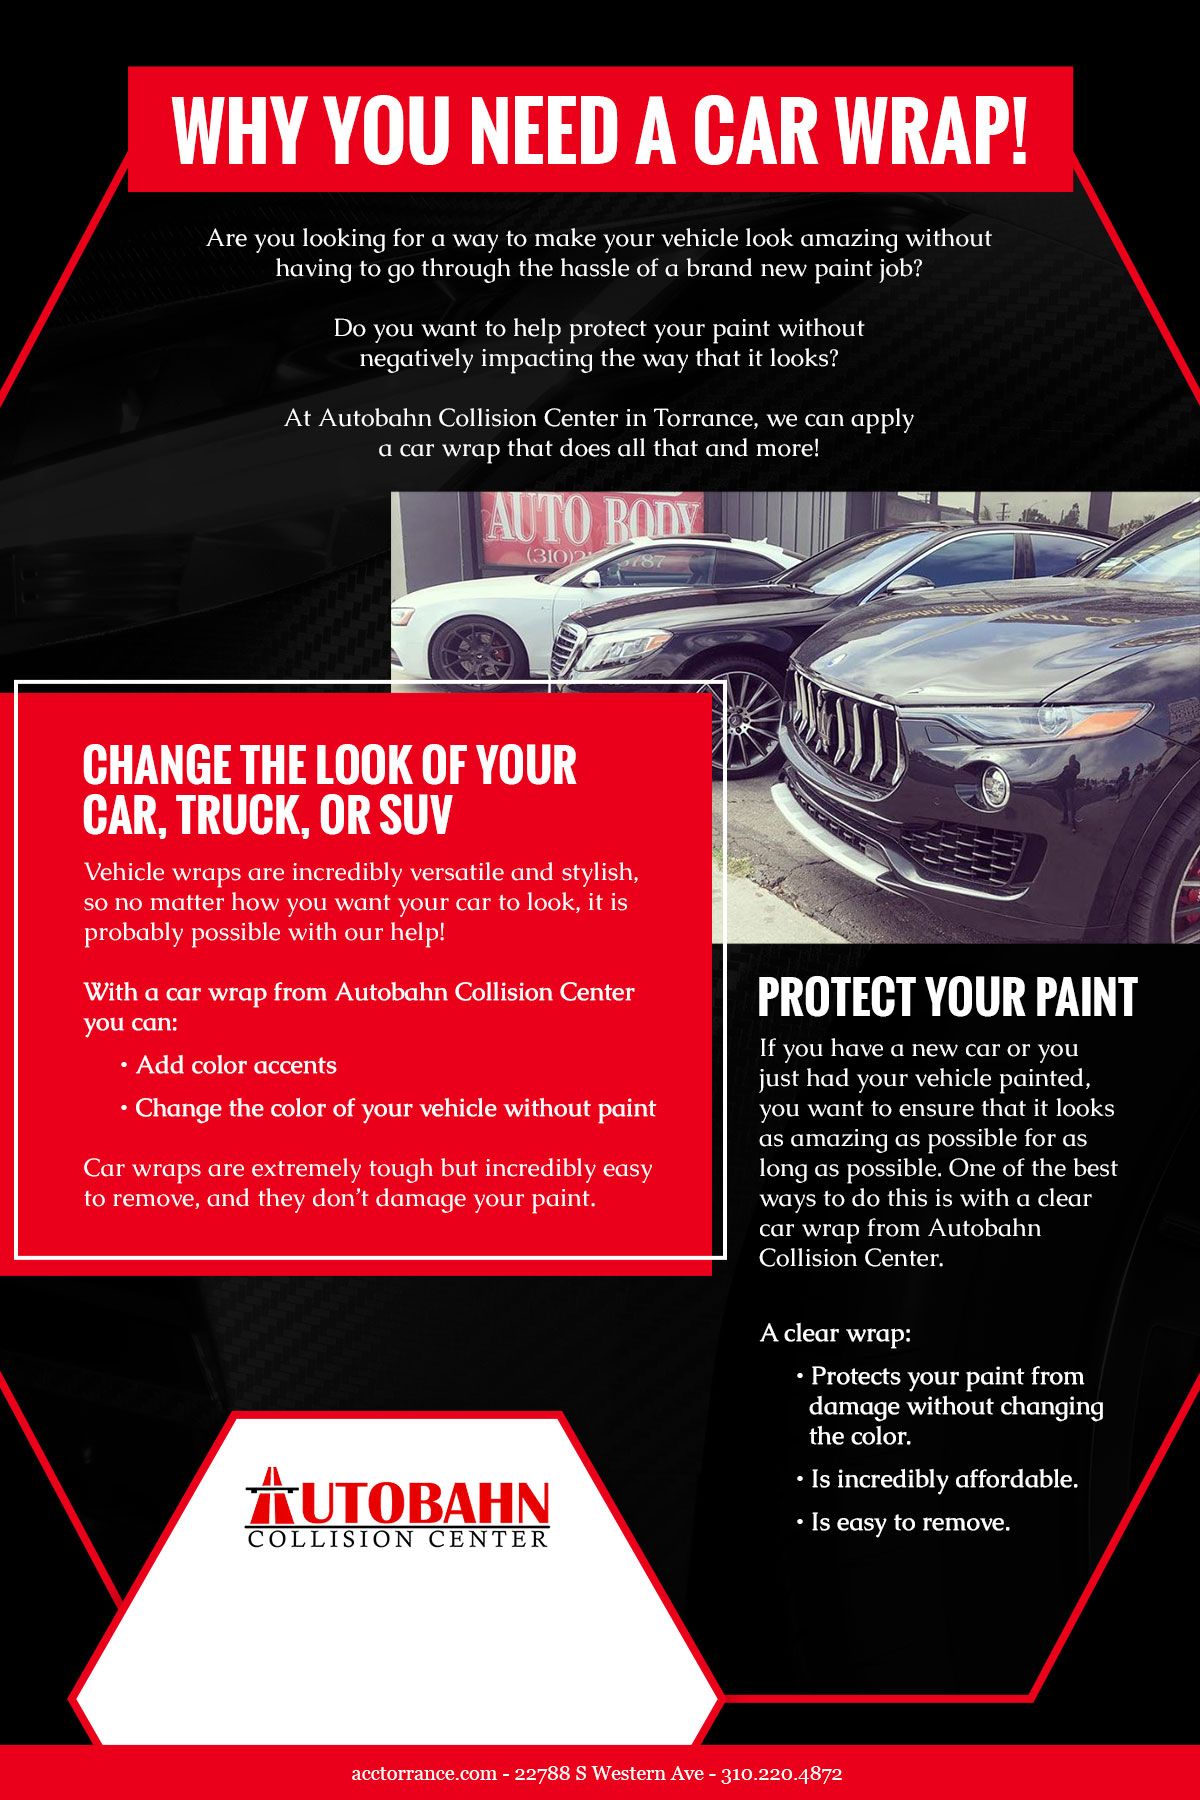 autobahn-infographic-why-you-need-a-car-wrap-5c23c0c8c9098.jpg